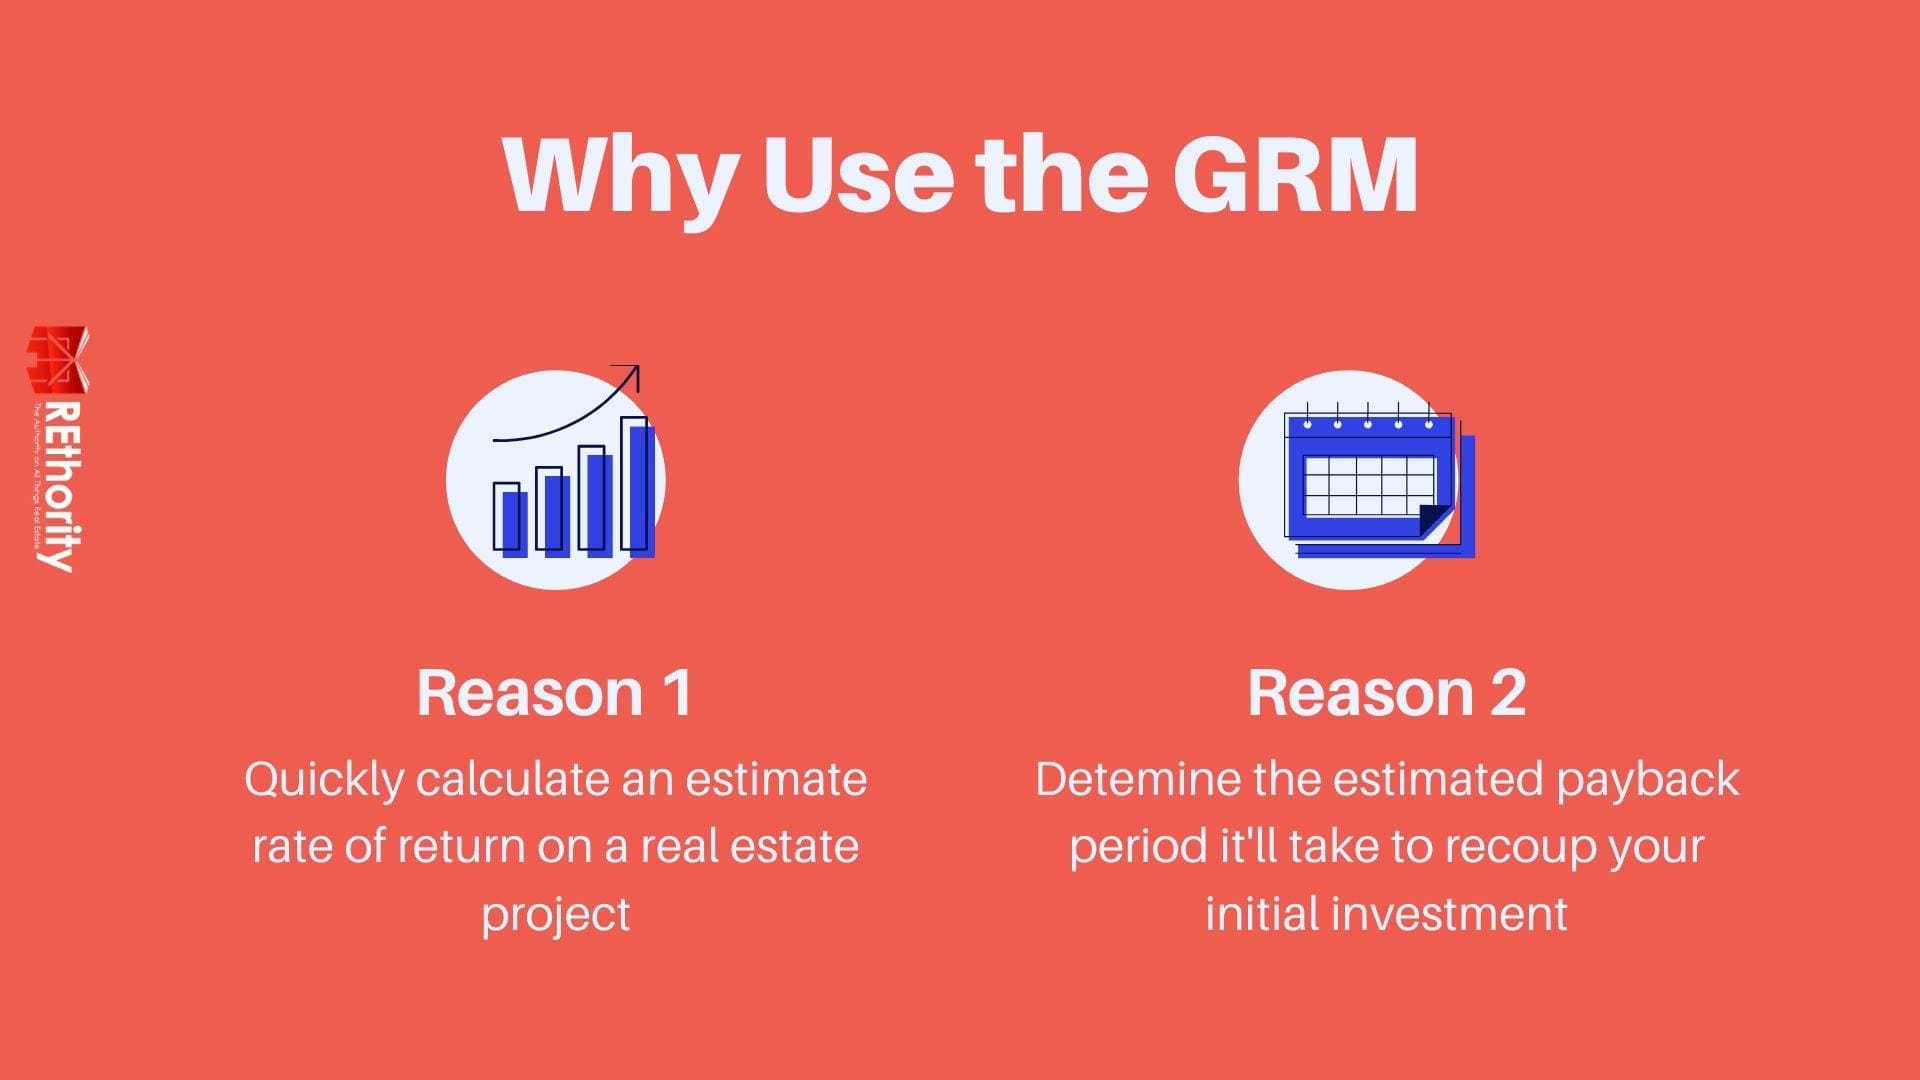 Two reasons to use the Gross Rent Multiplier formula